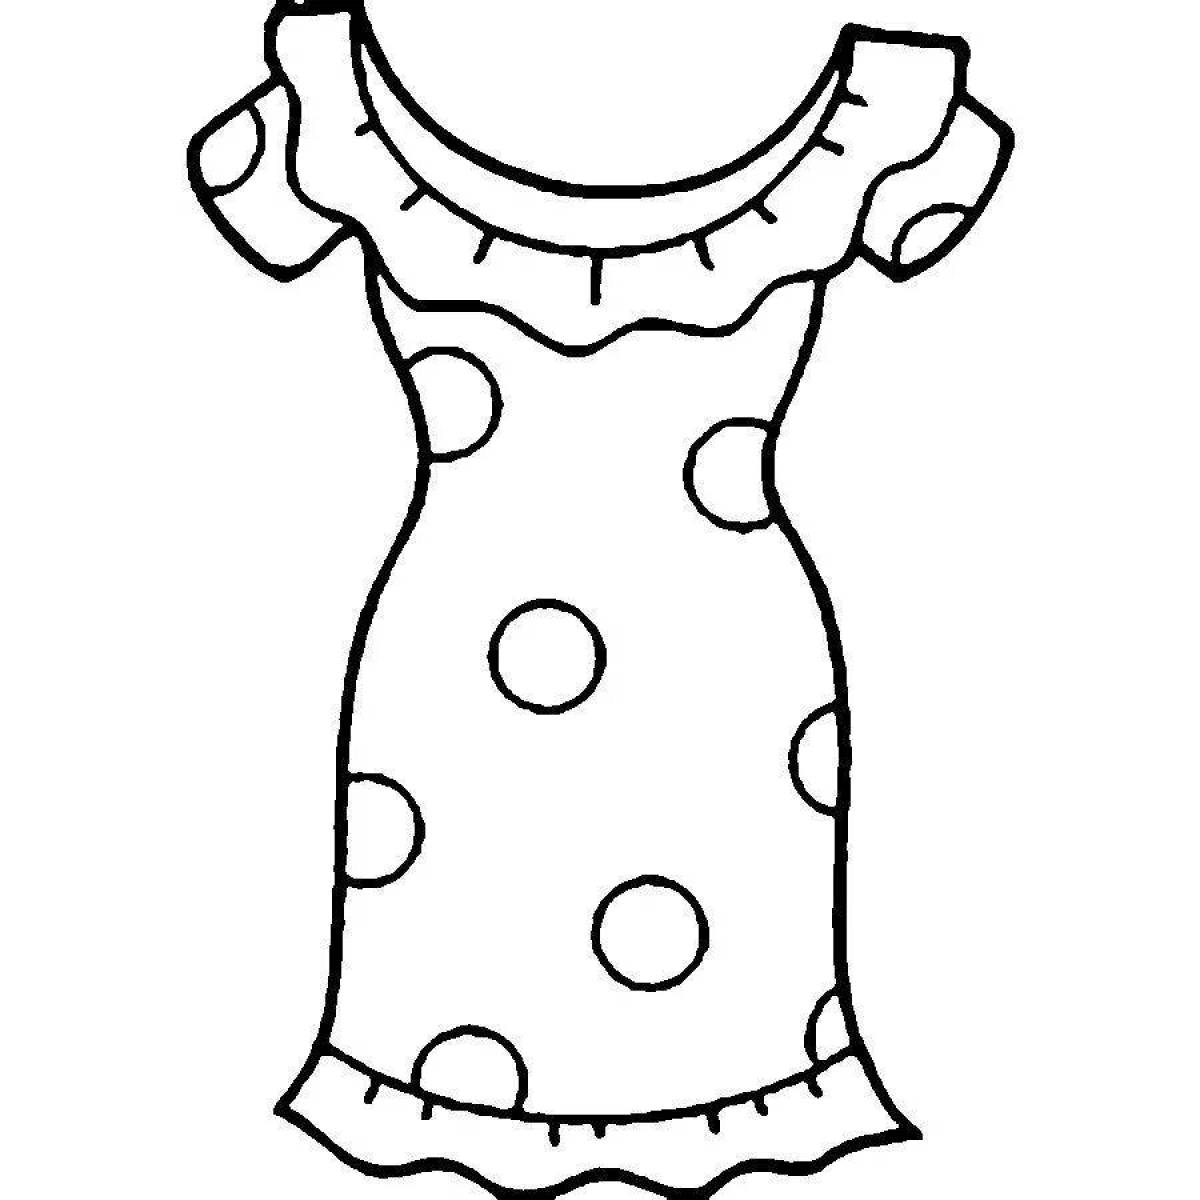 Shining dress coloring book for kids